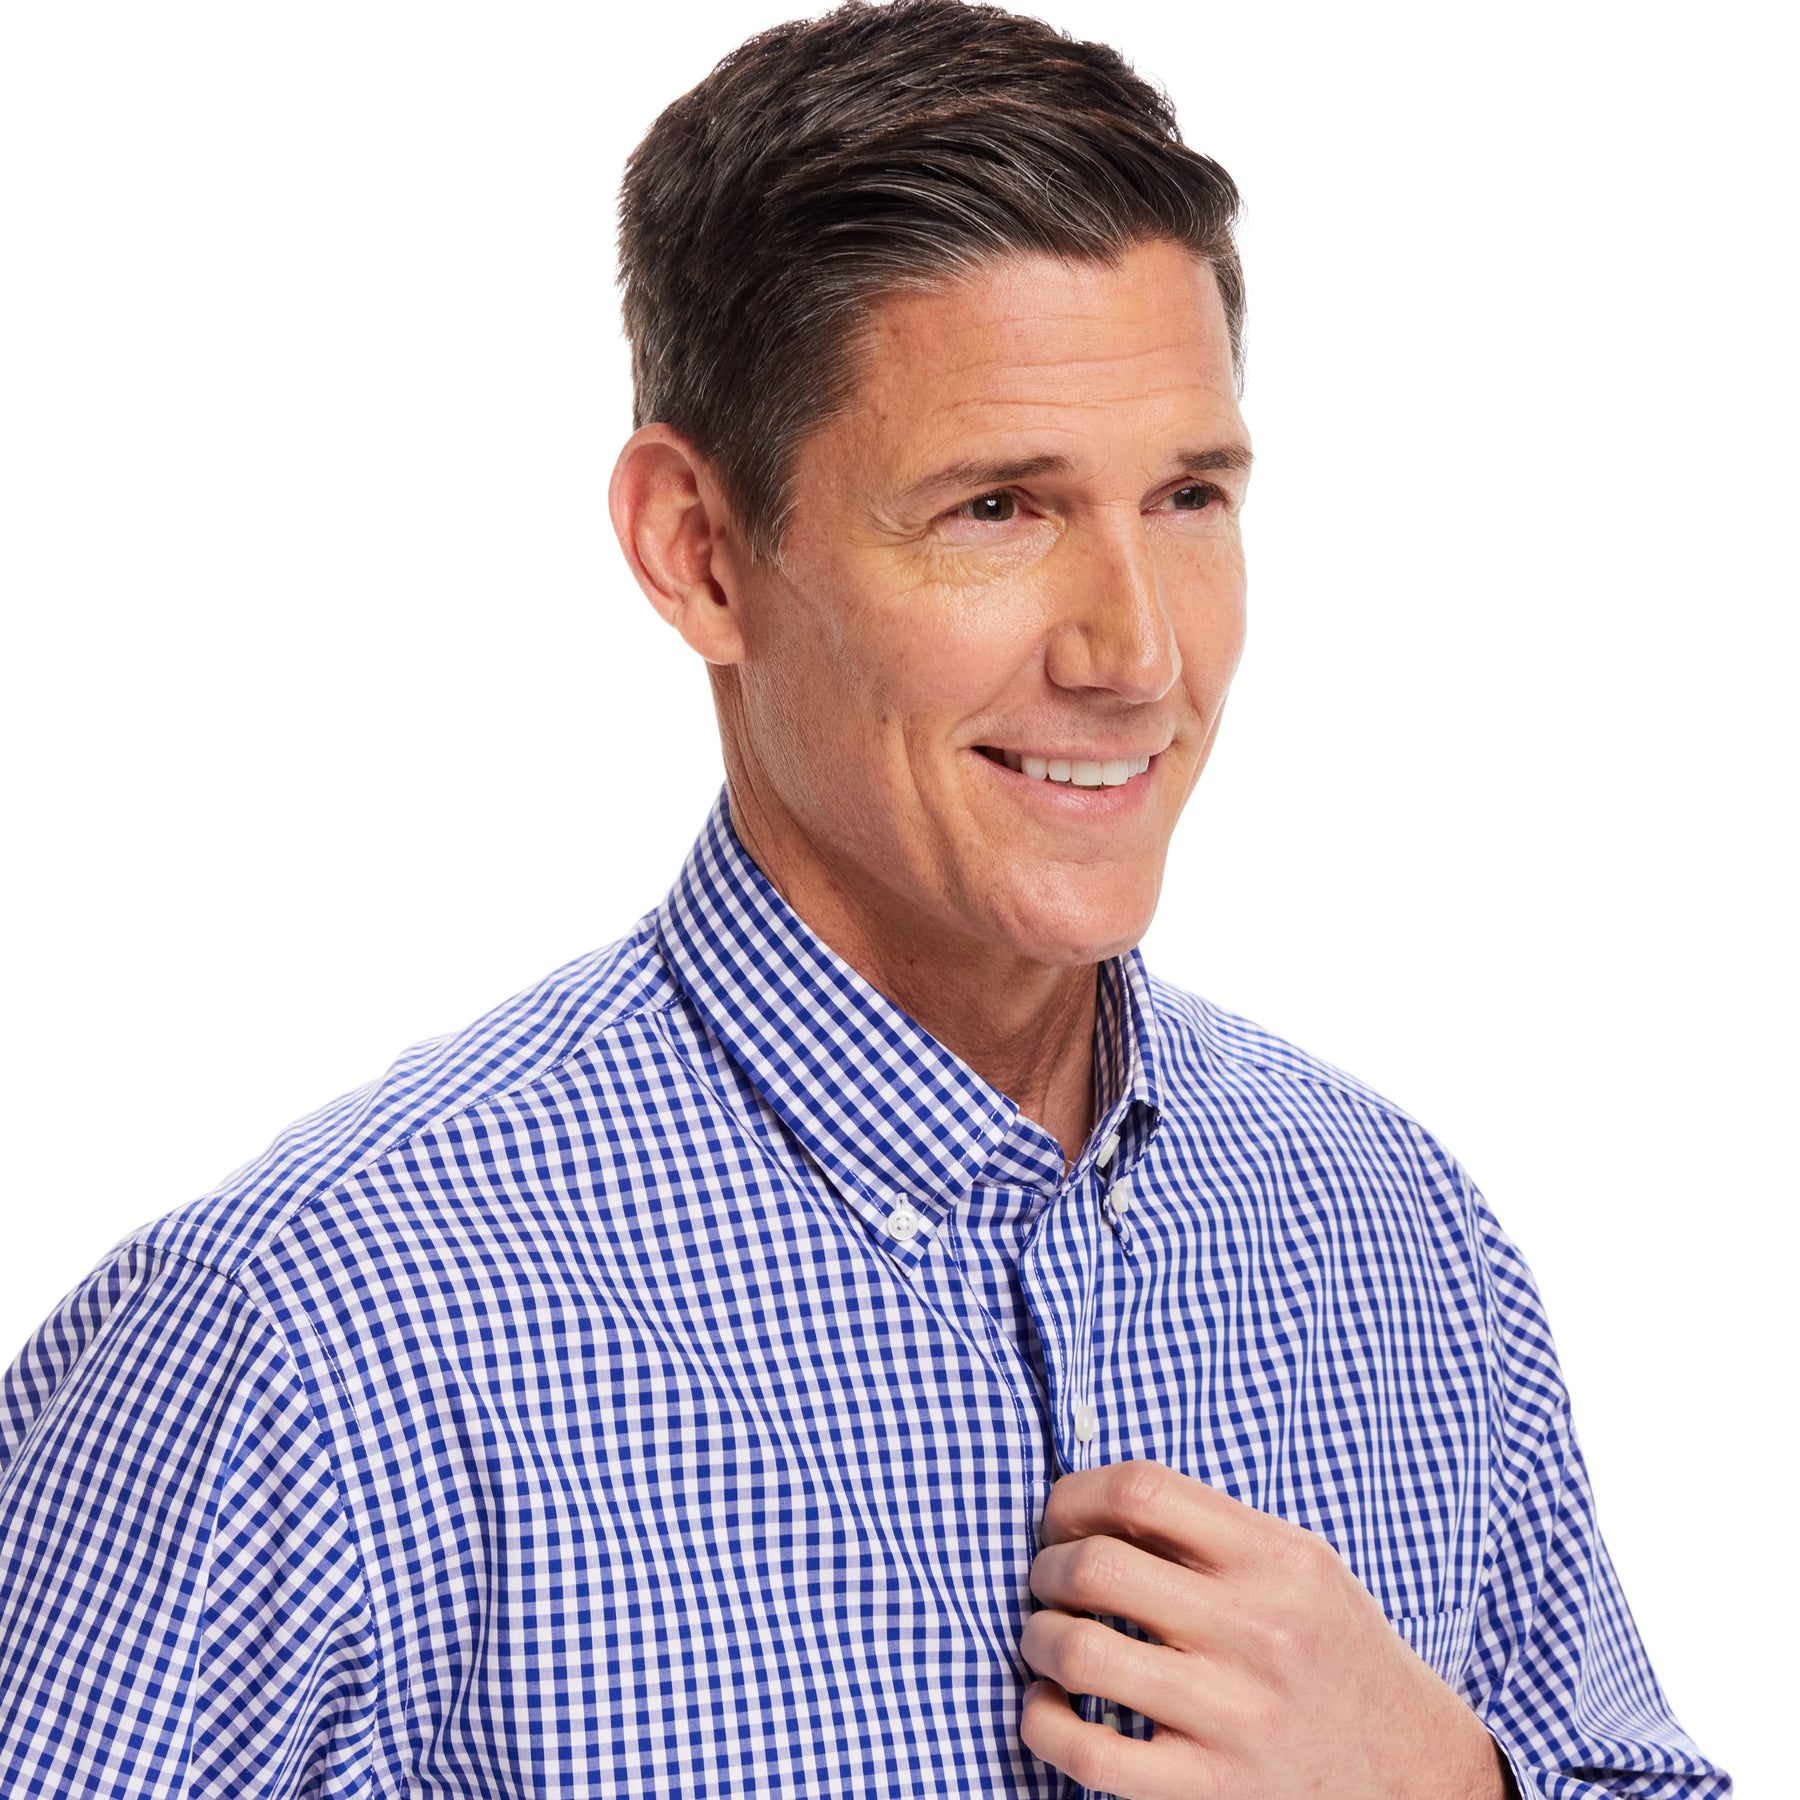 Long Sleeve Navy and White Classic Button Down Collar Plaid Shirt with Magnetic Closures